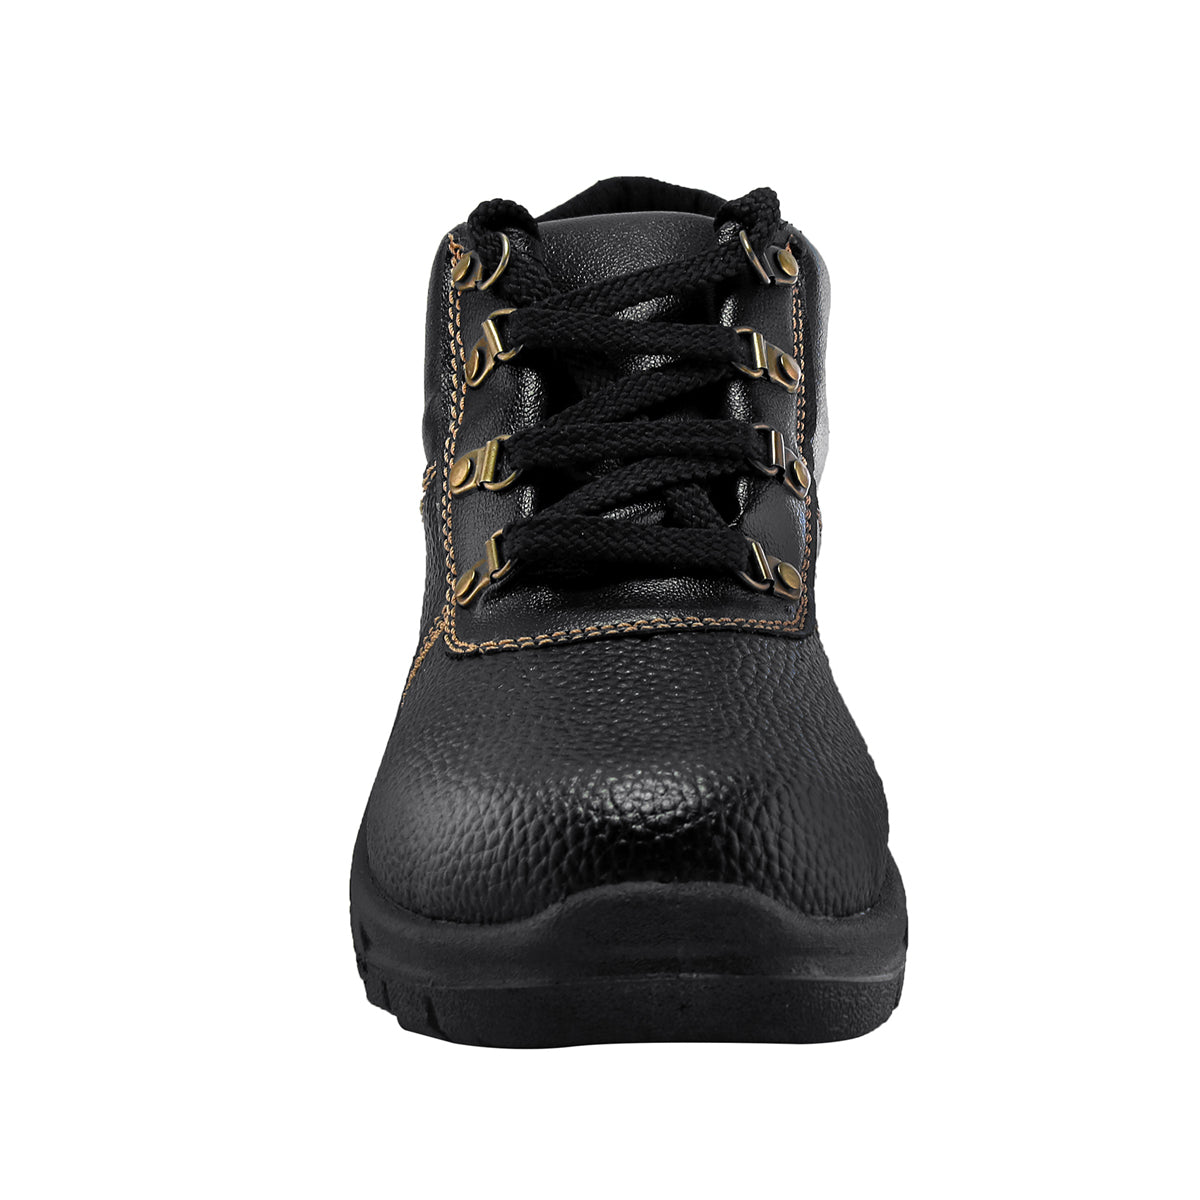 galista safety shoes